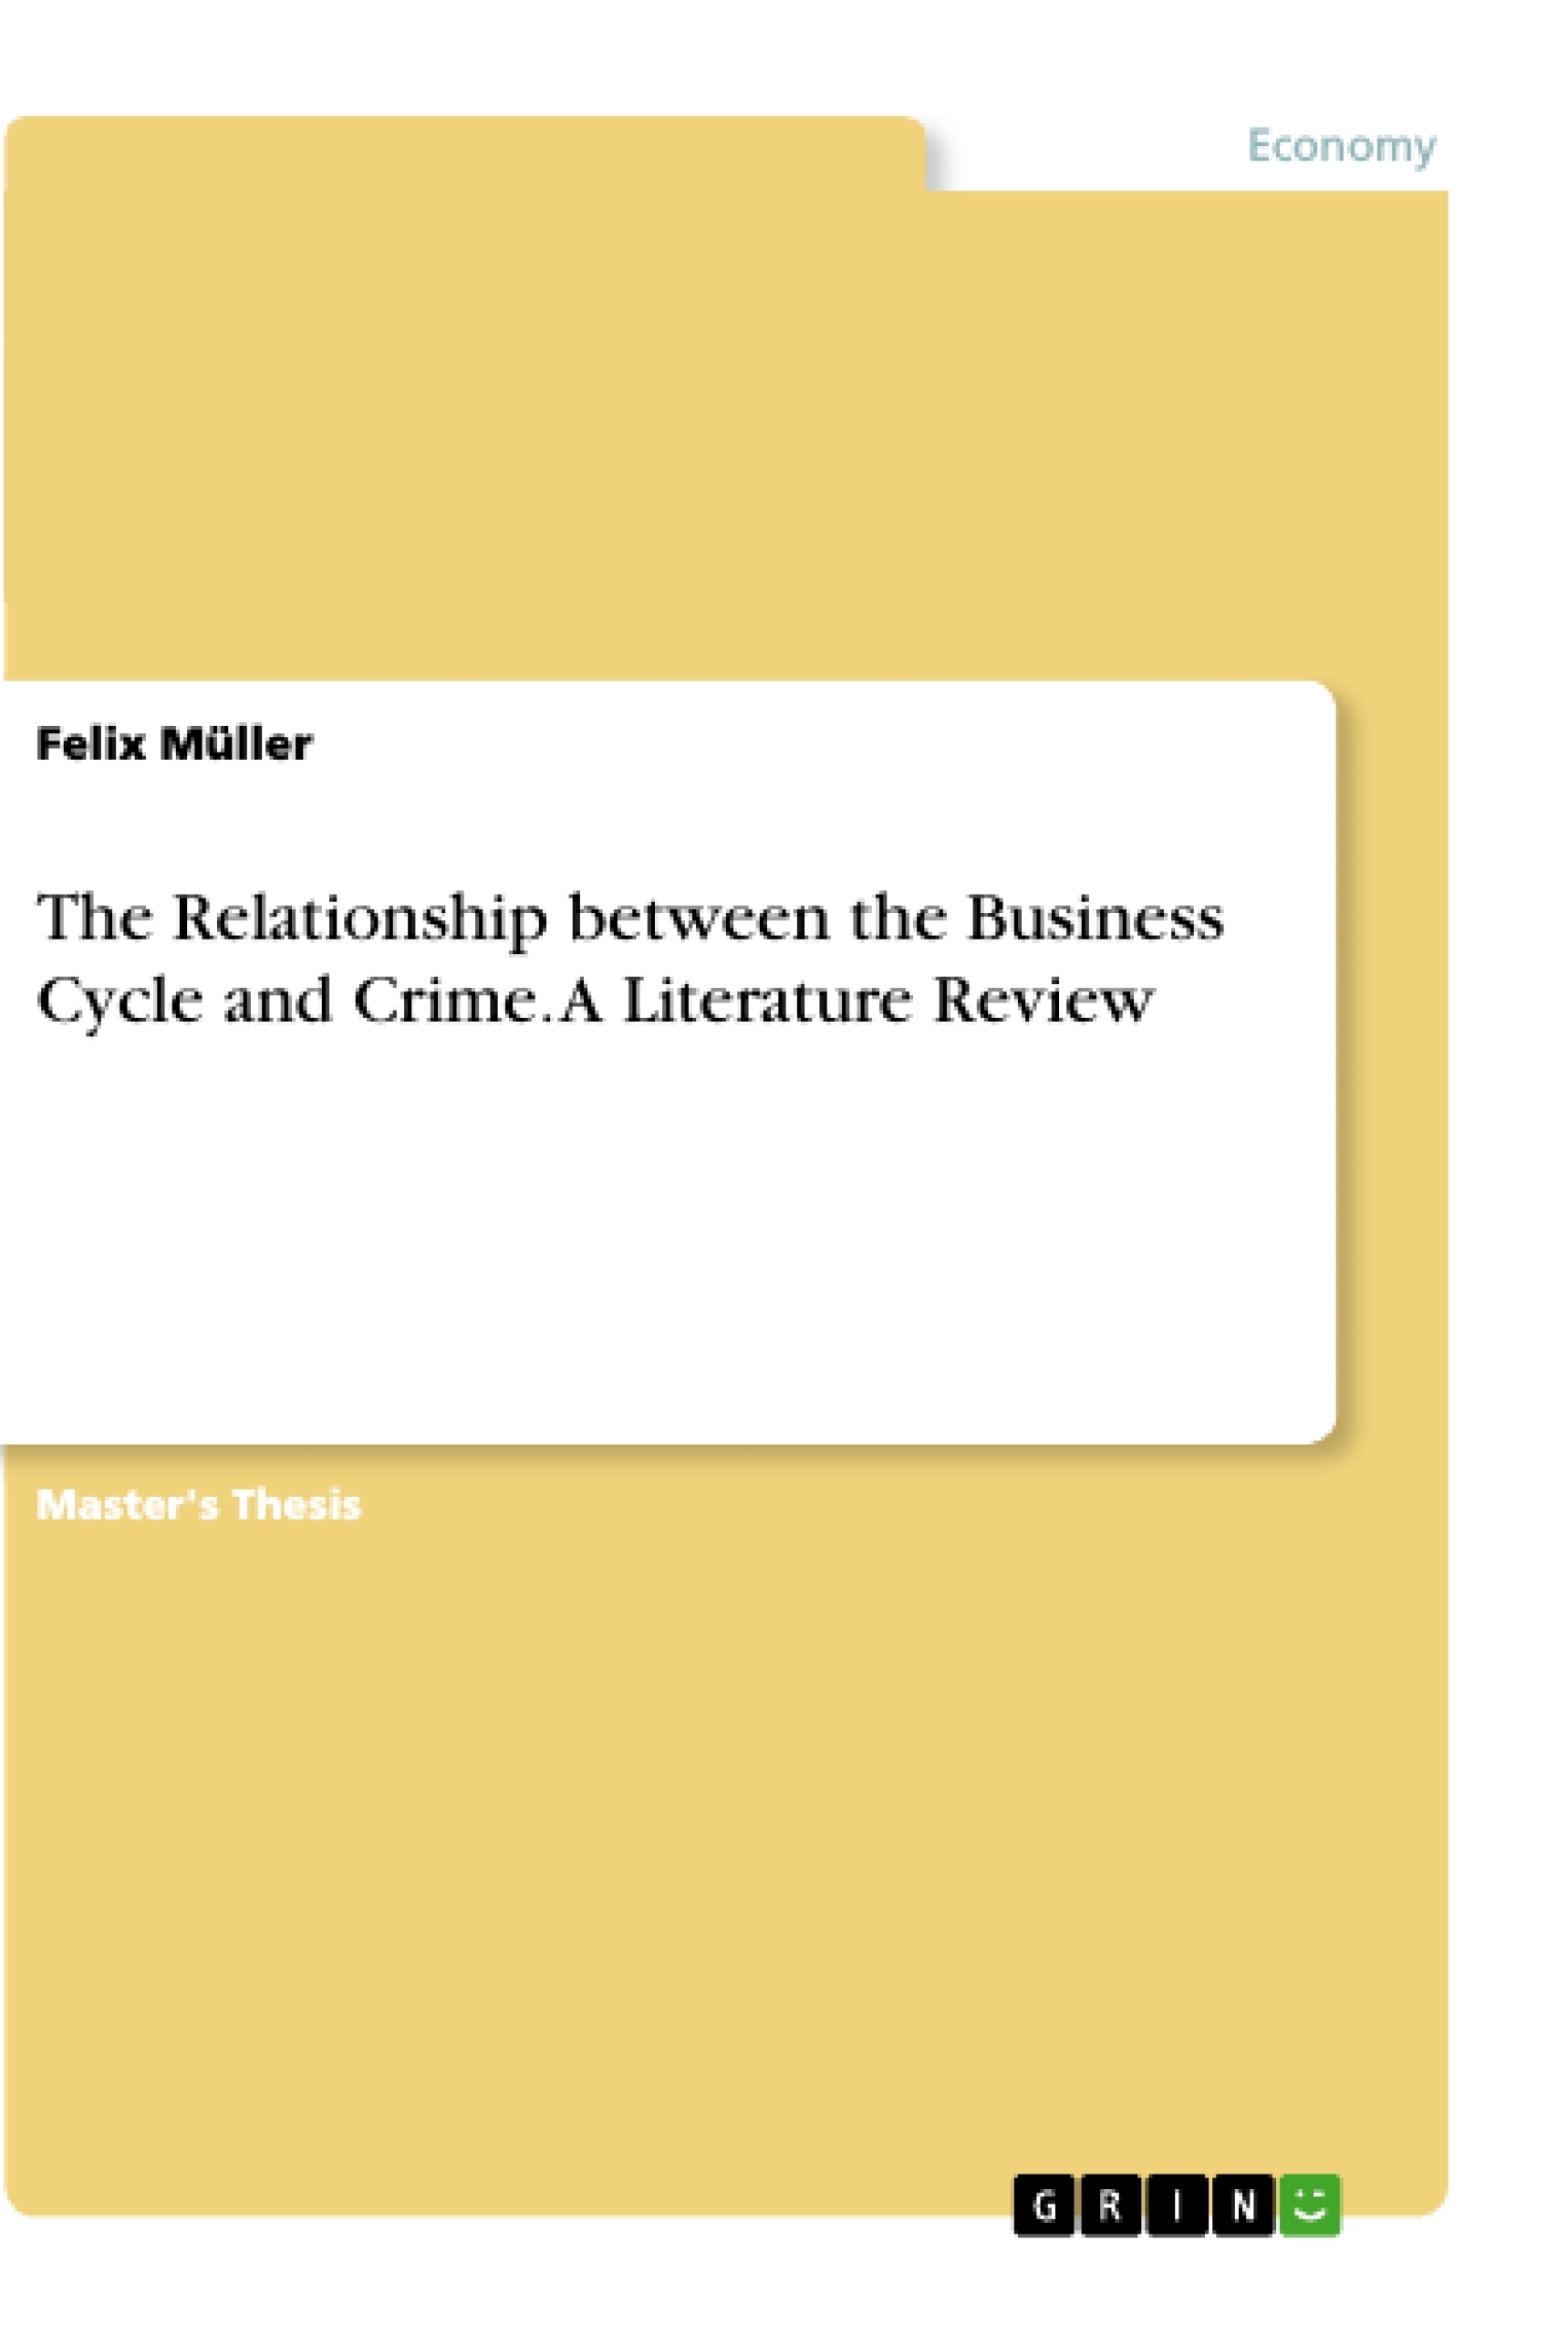 Title: The Relationship between the Business Cycle and Crime. A Literature Review